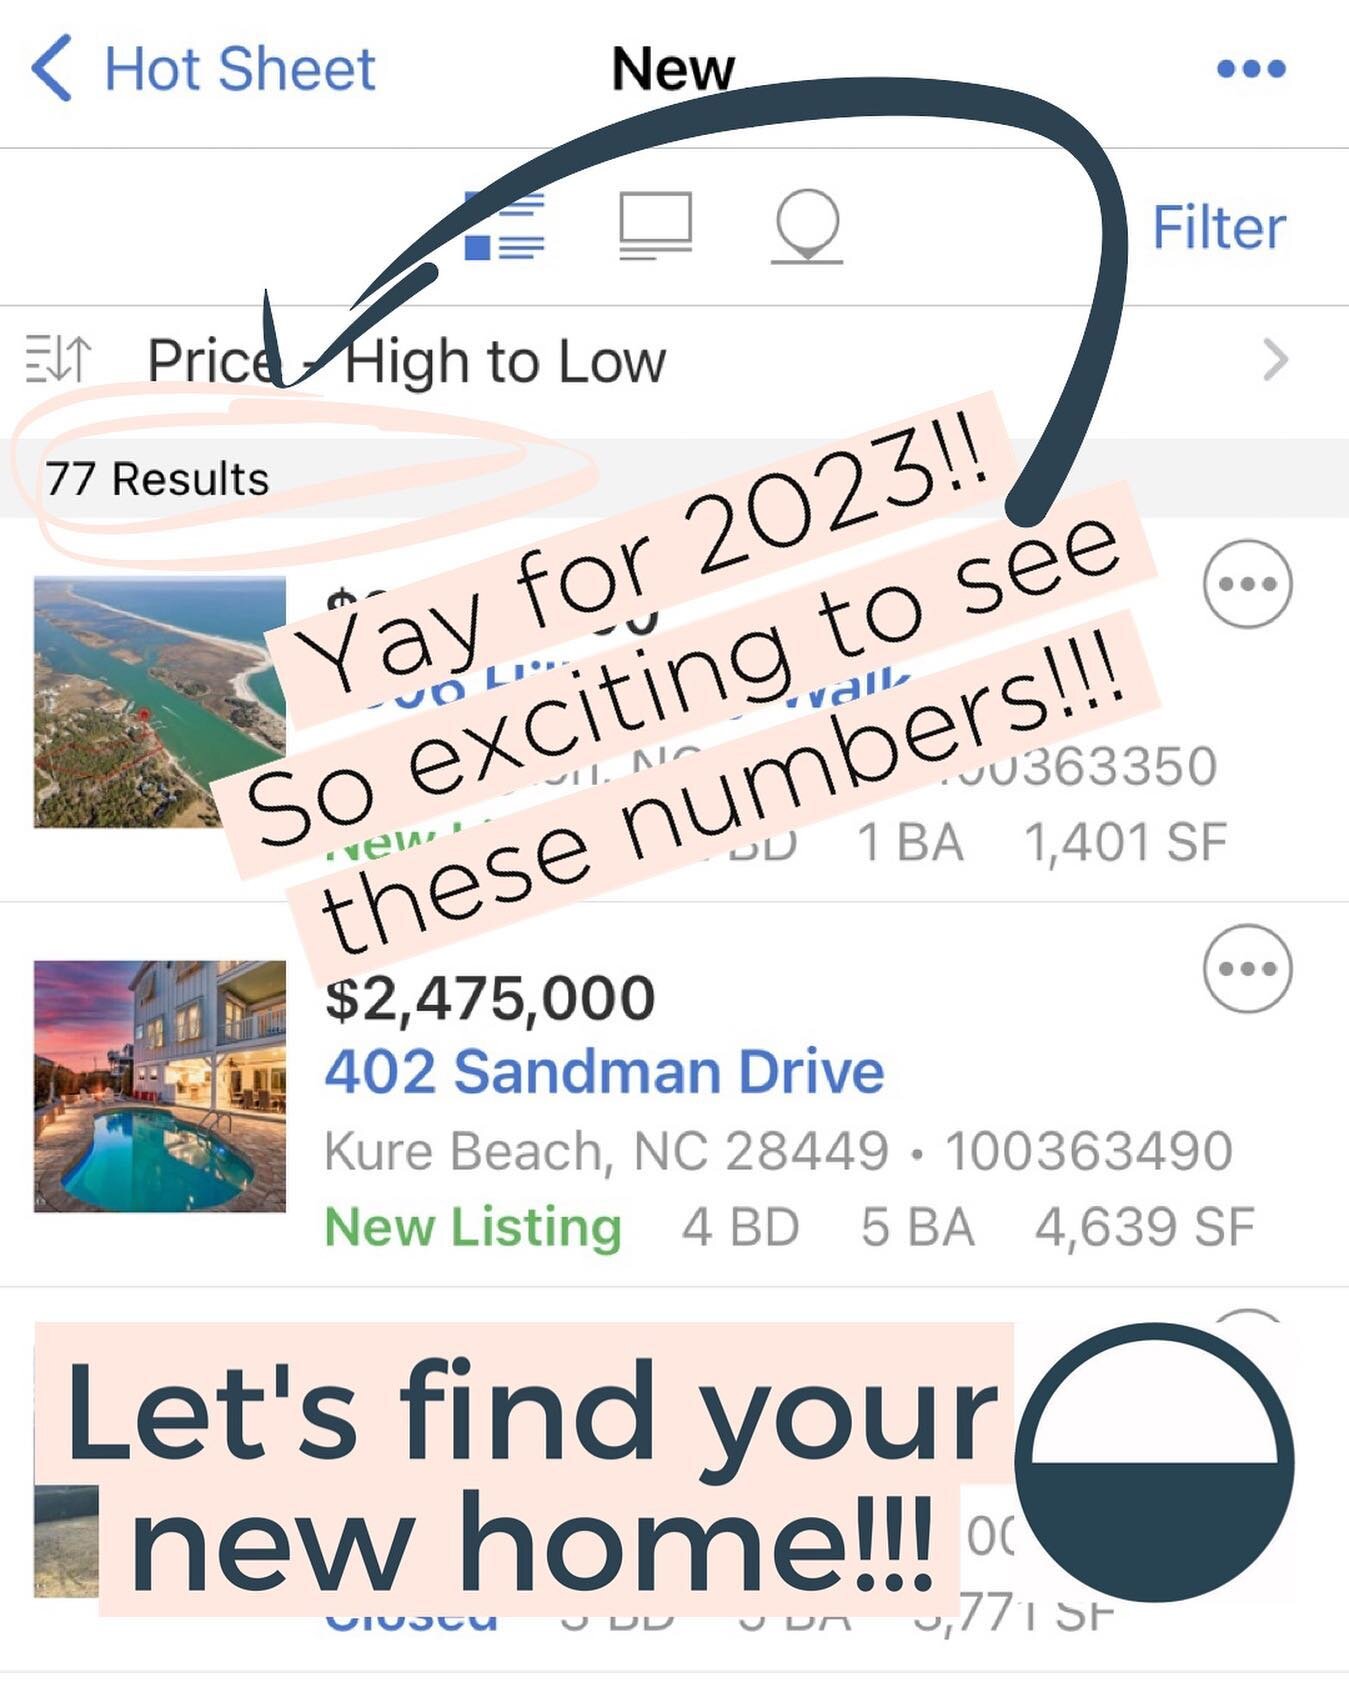 Y&rsquo;all - these numbers are so exciting for our buyers!! 77 new homes just went on the market - and across all price ranges!! 🤗 

(We&rsquo;ve been seeing less than 10 lately - sometimes as little as 3 or 4 - so this is huge!) So excited for wha